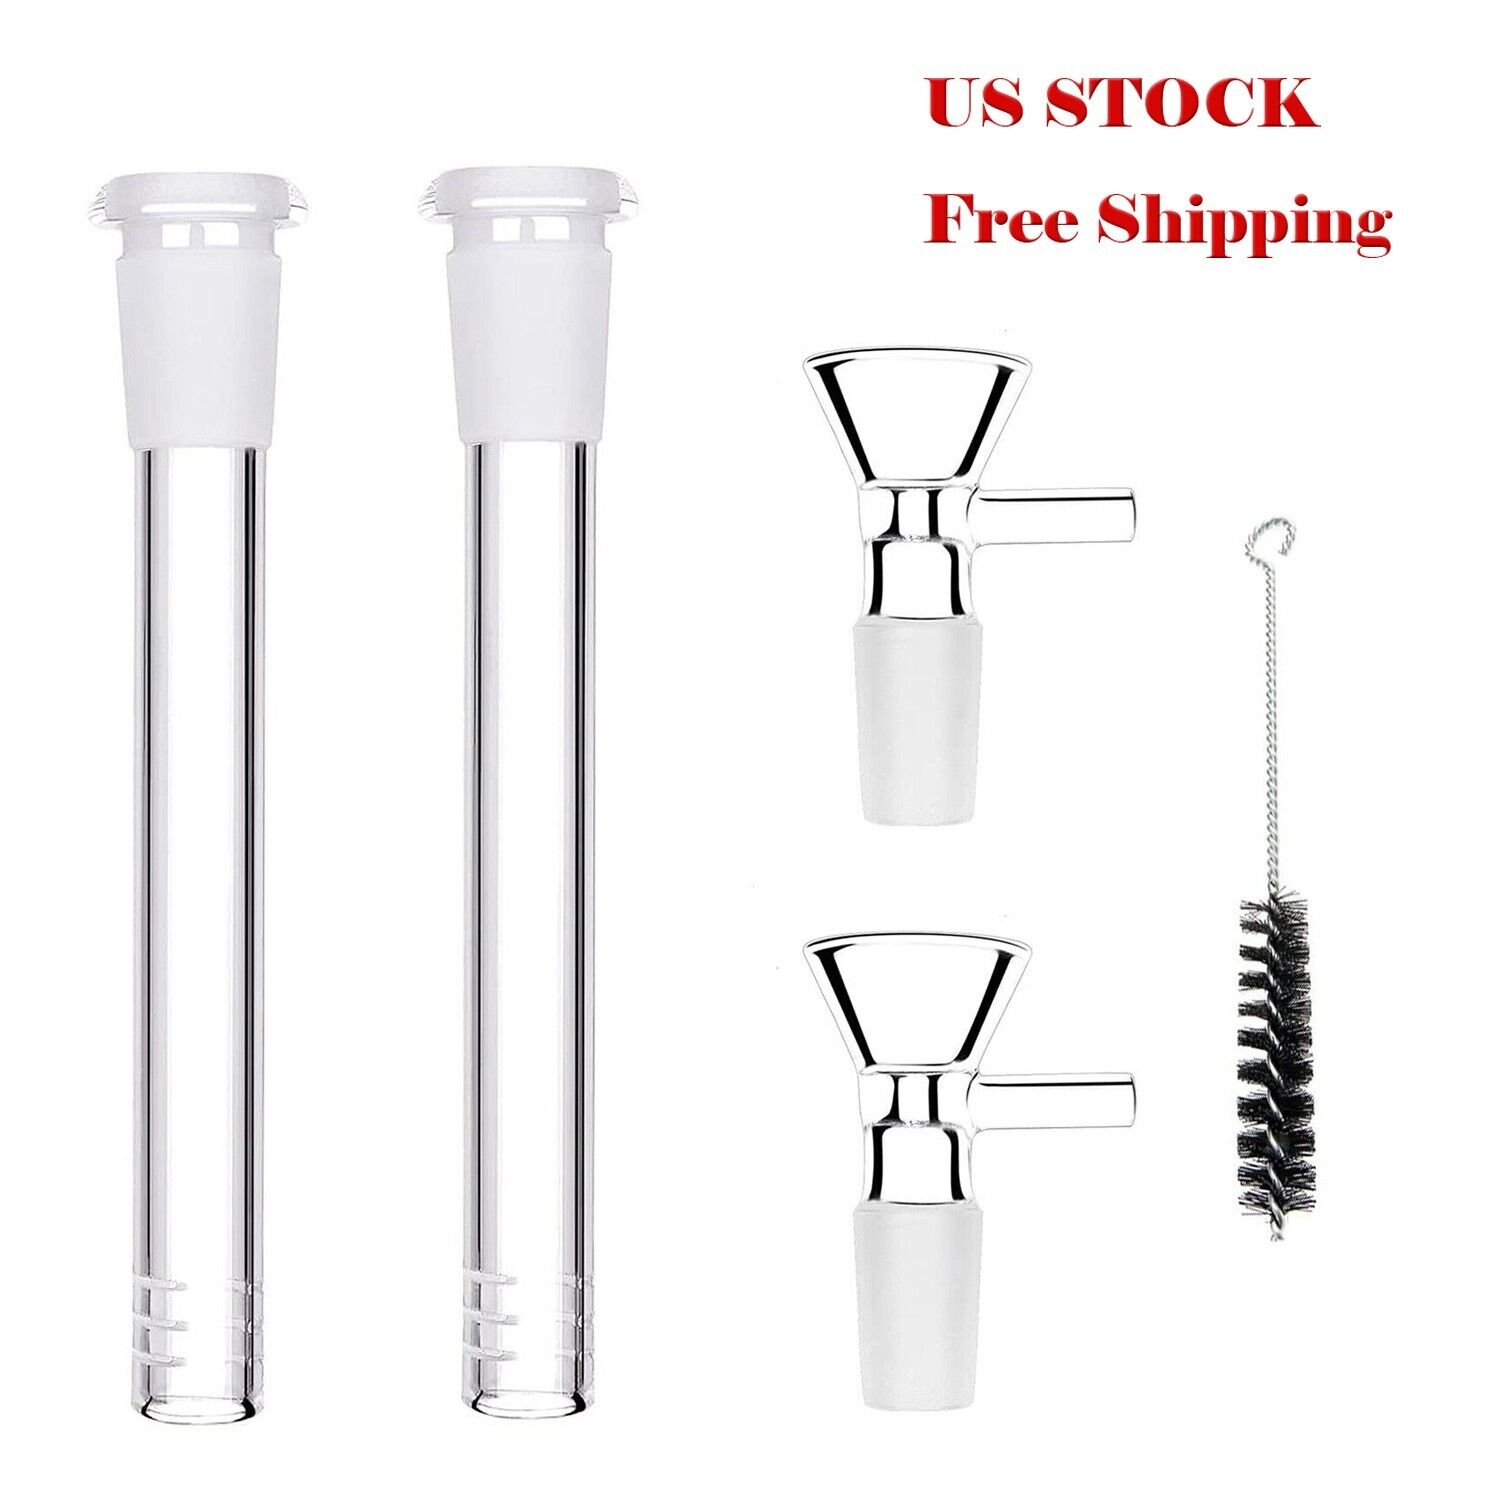 2PC 4.7 ''Glass Hookah Adapters Down Stem and 2PC 14mm Hookah Bowl Brushes Set